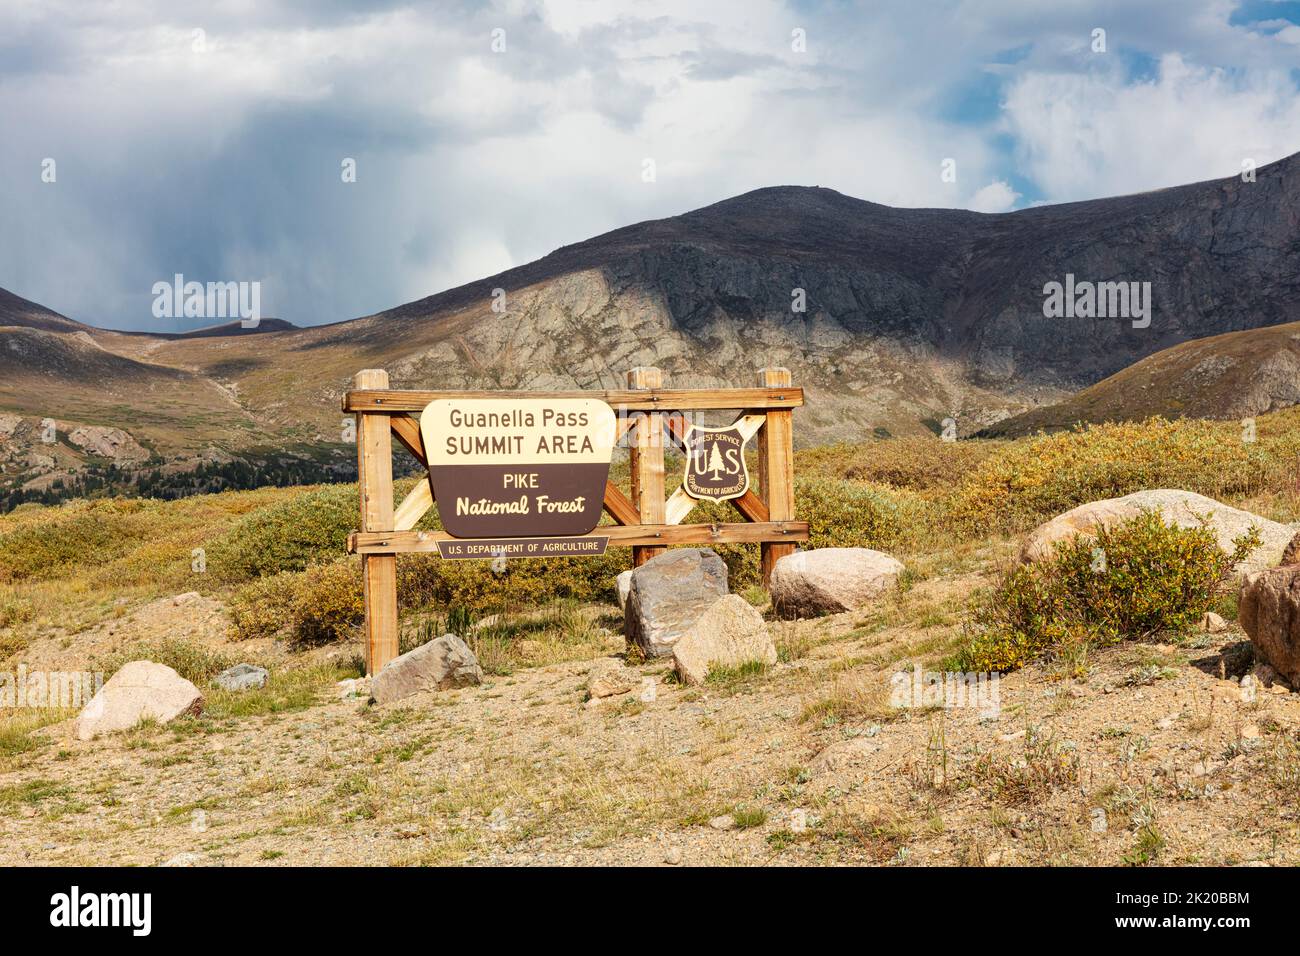 Guanella Pass Summit Area sign, Pike National Forest, Colorado Stock Photo